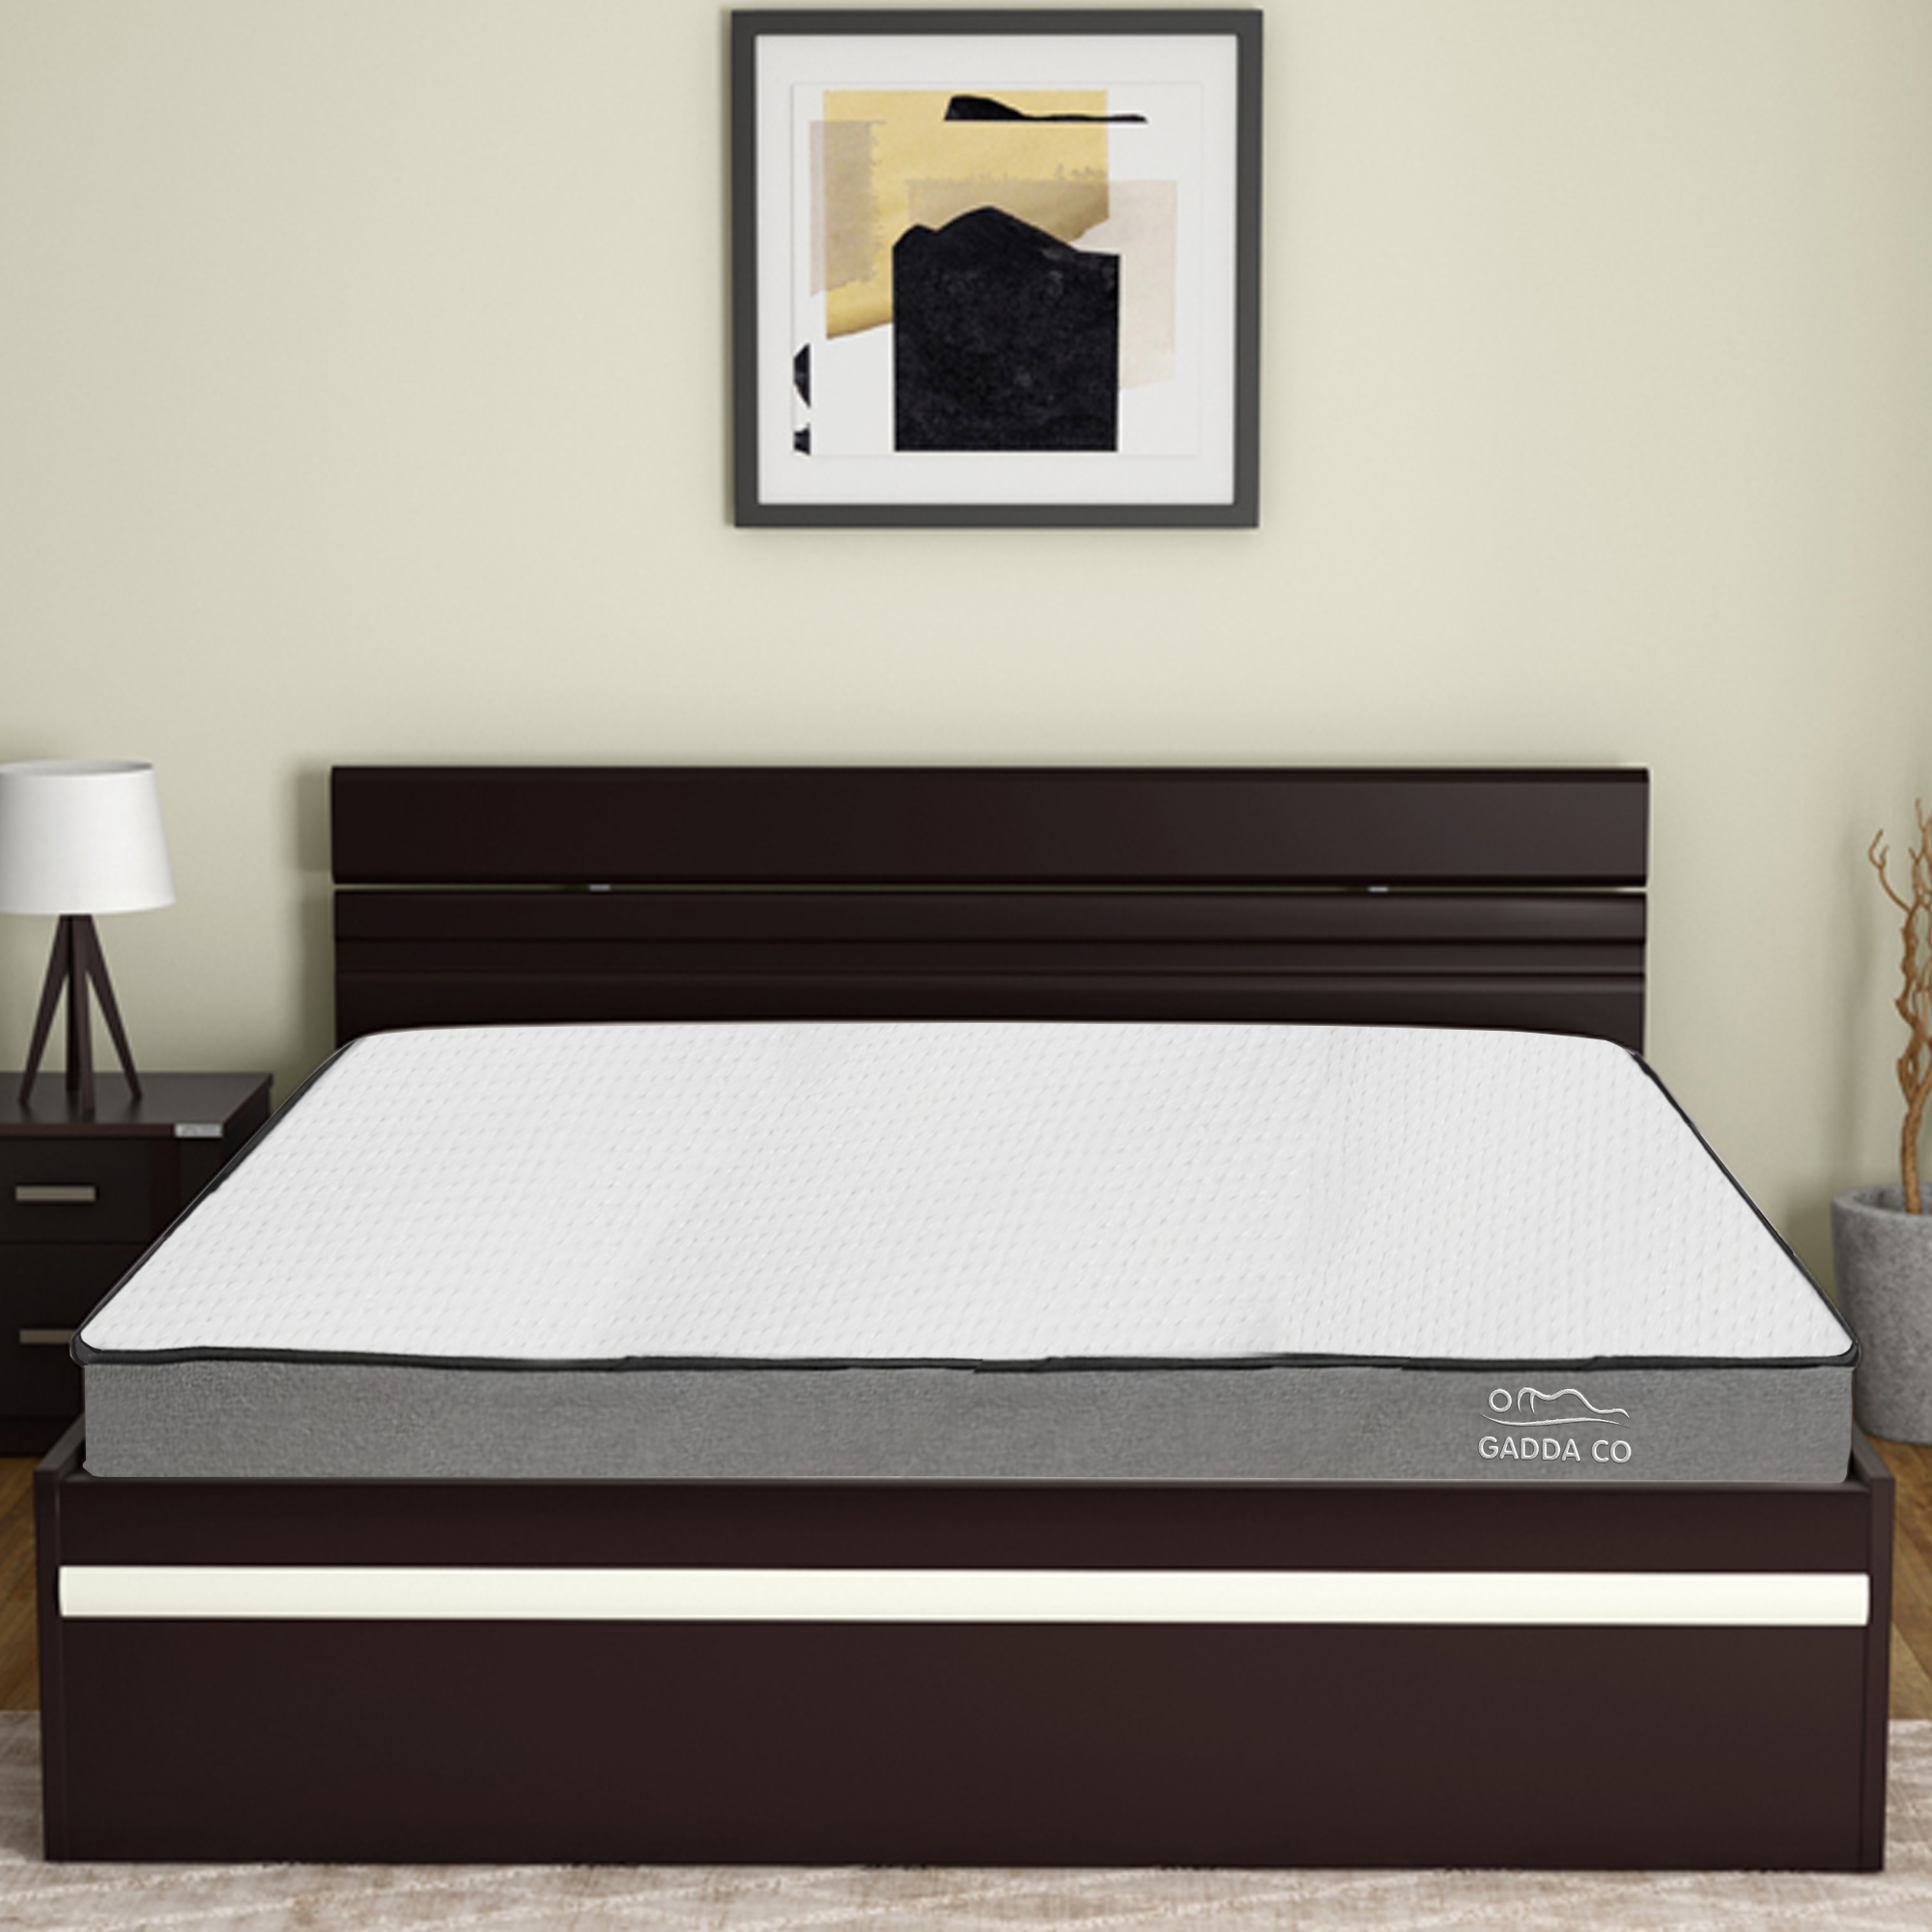 Body Adaptable Memory Form(Mattress), Double Bed, 72x72x6 Inches, Specifically Engineered 3 Layer Technology for Dual Comfort